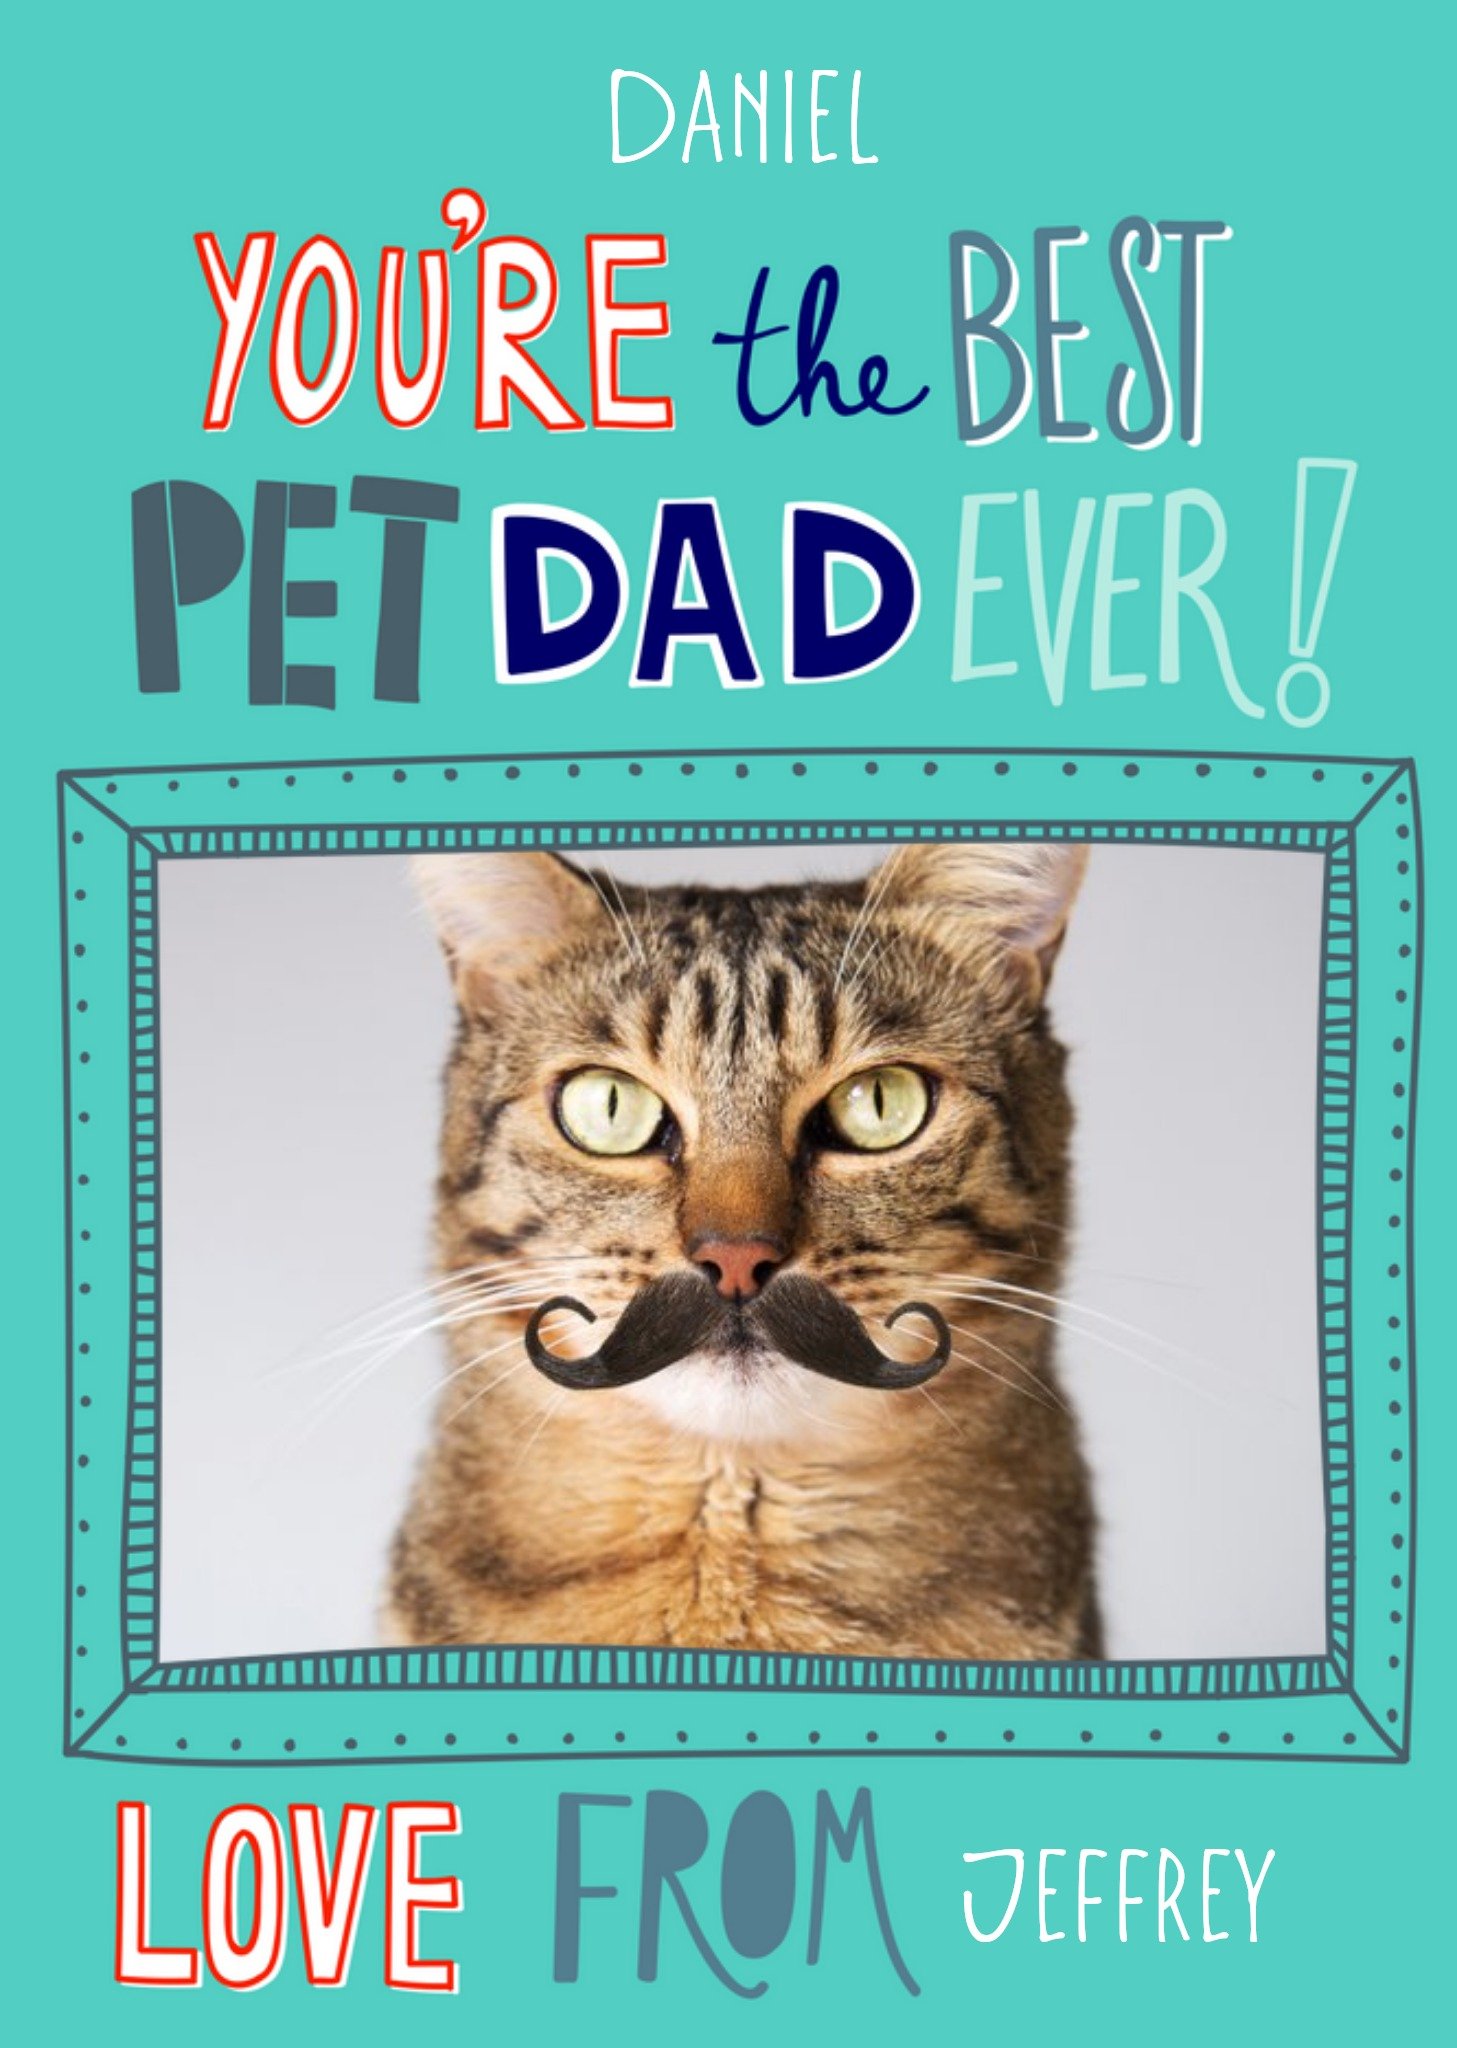 Moonpig Personalised Youre The Best Pet Dad Ever Photo Card, Large